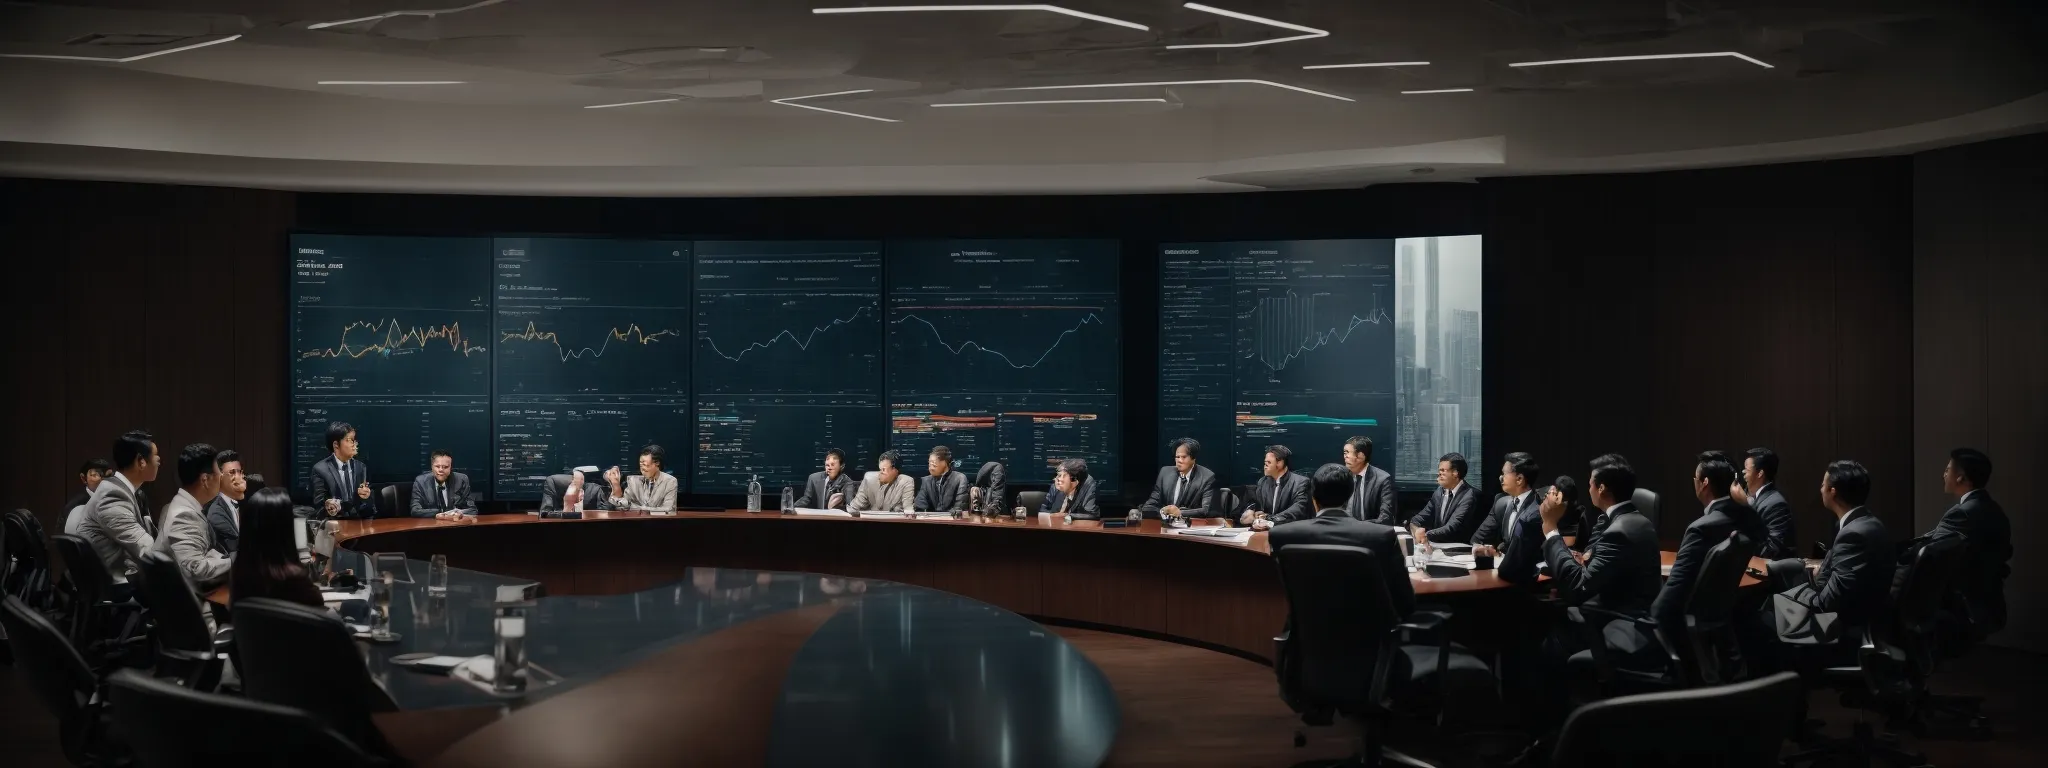 a boardroom with a large display screen showcasing a data management graph, surrounded by professionals engaged in strategic discussion.